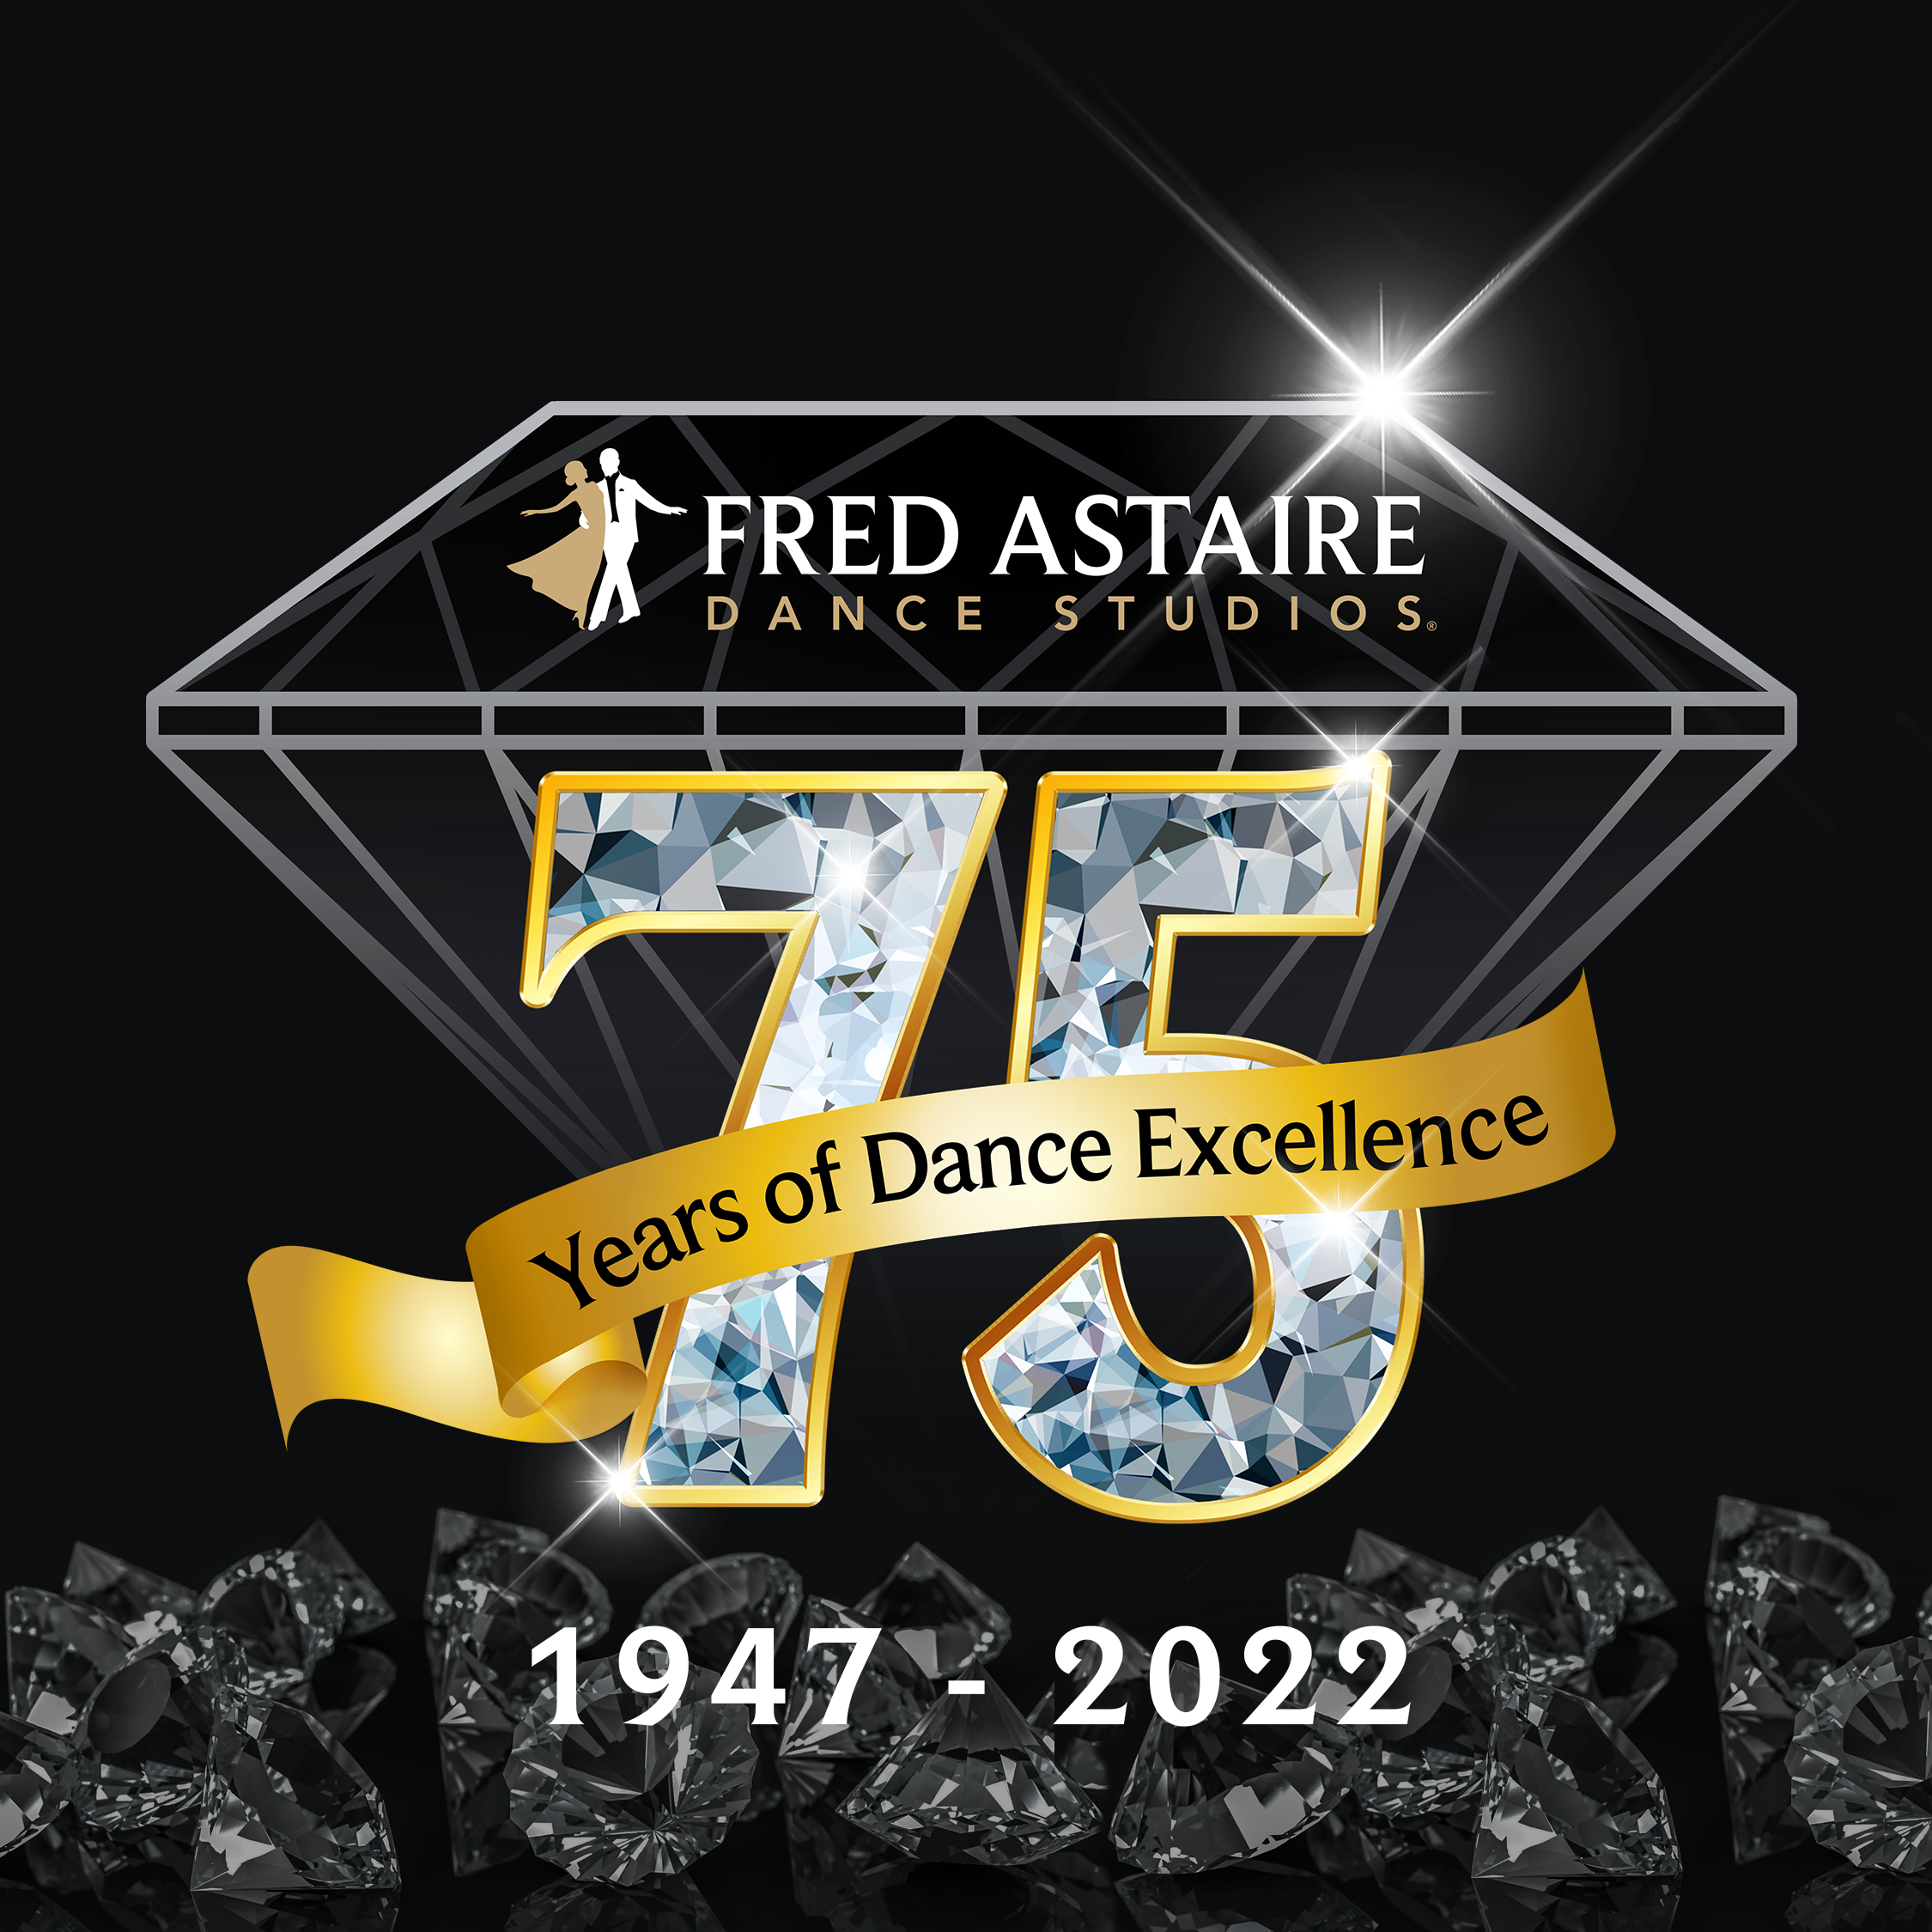 Fred Astaire Dance Studios - RiversidNo matter if dancing by yourself, or with a Partner, the Fred Astaire Dance Studios - Riverside is the place for you to learn! We teach in Private Dance Lessons, Group Dance Lessons and of course we have Parties for you to practice at! Call today to learn more! 401-415-9766